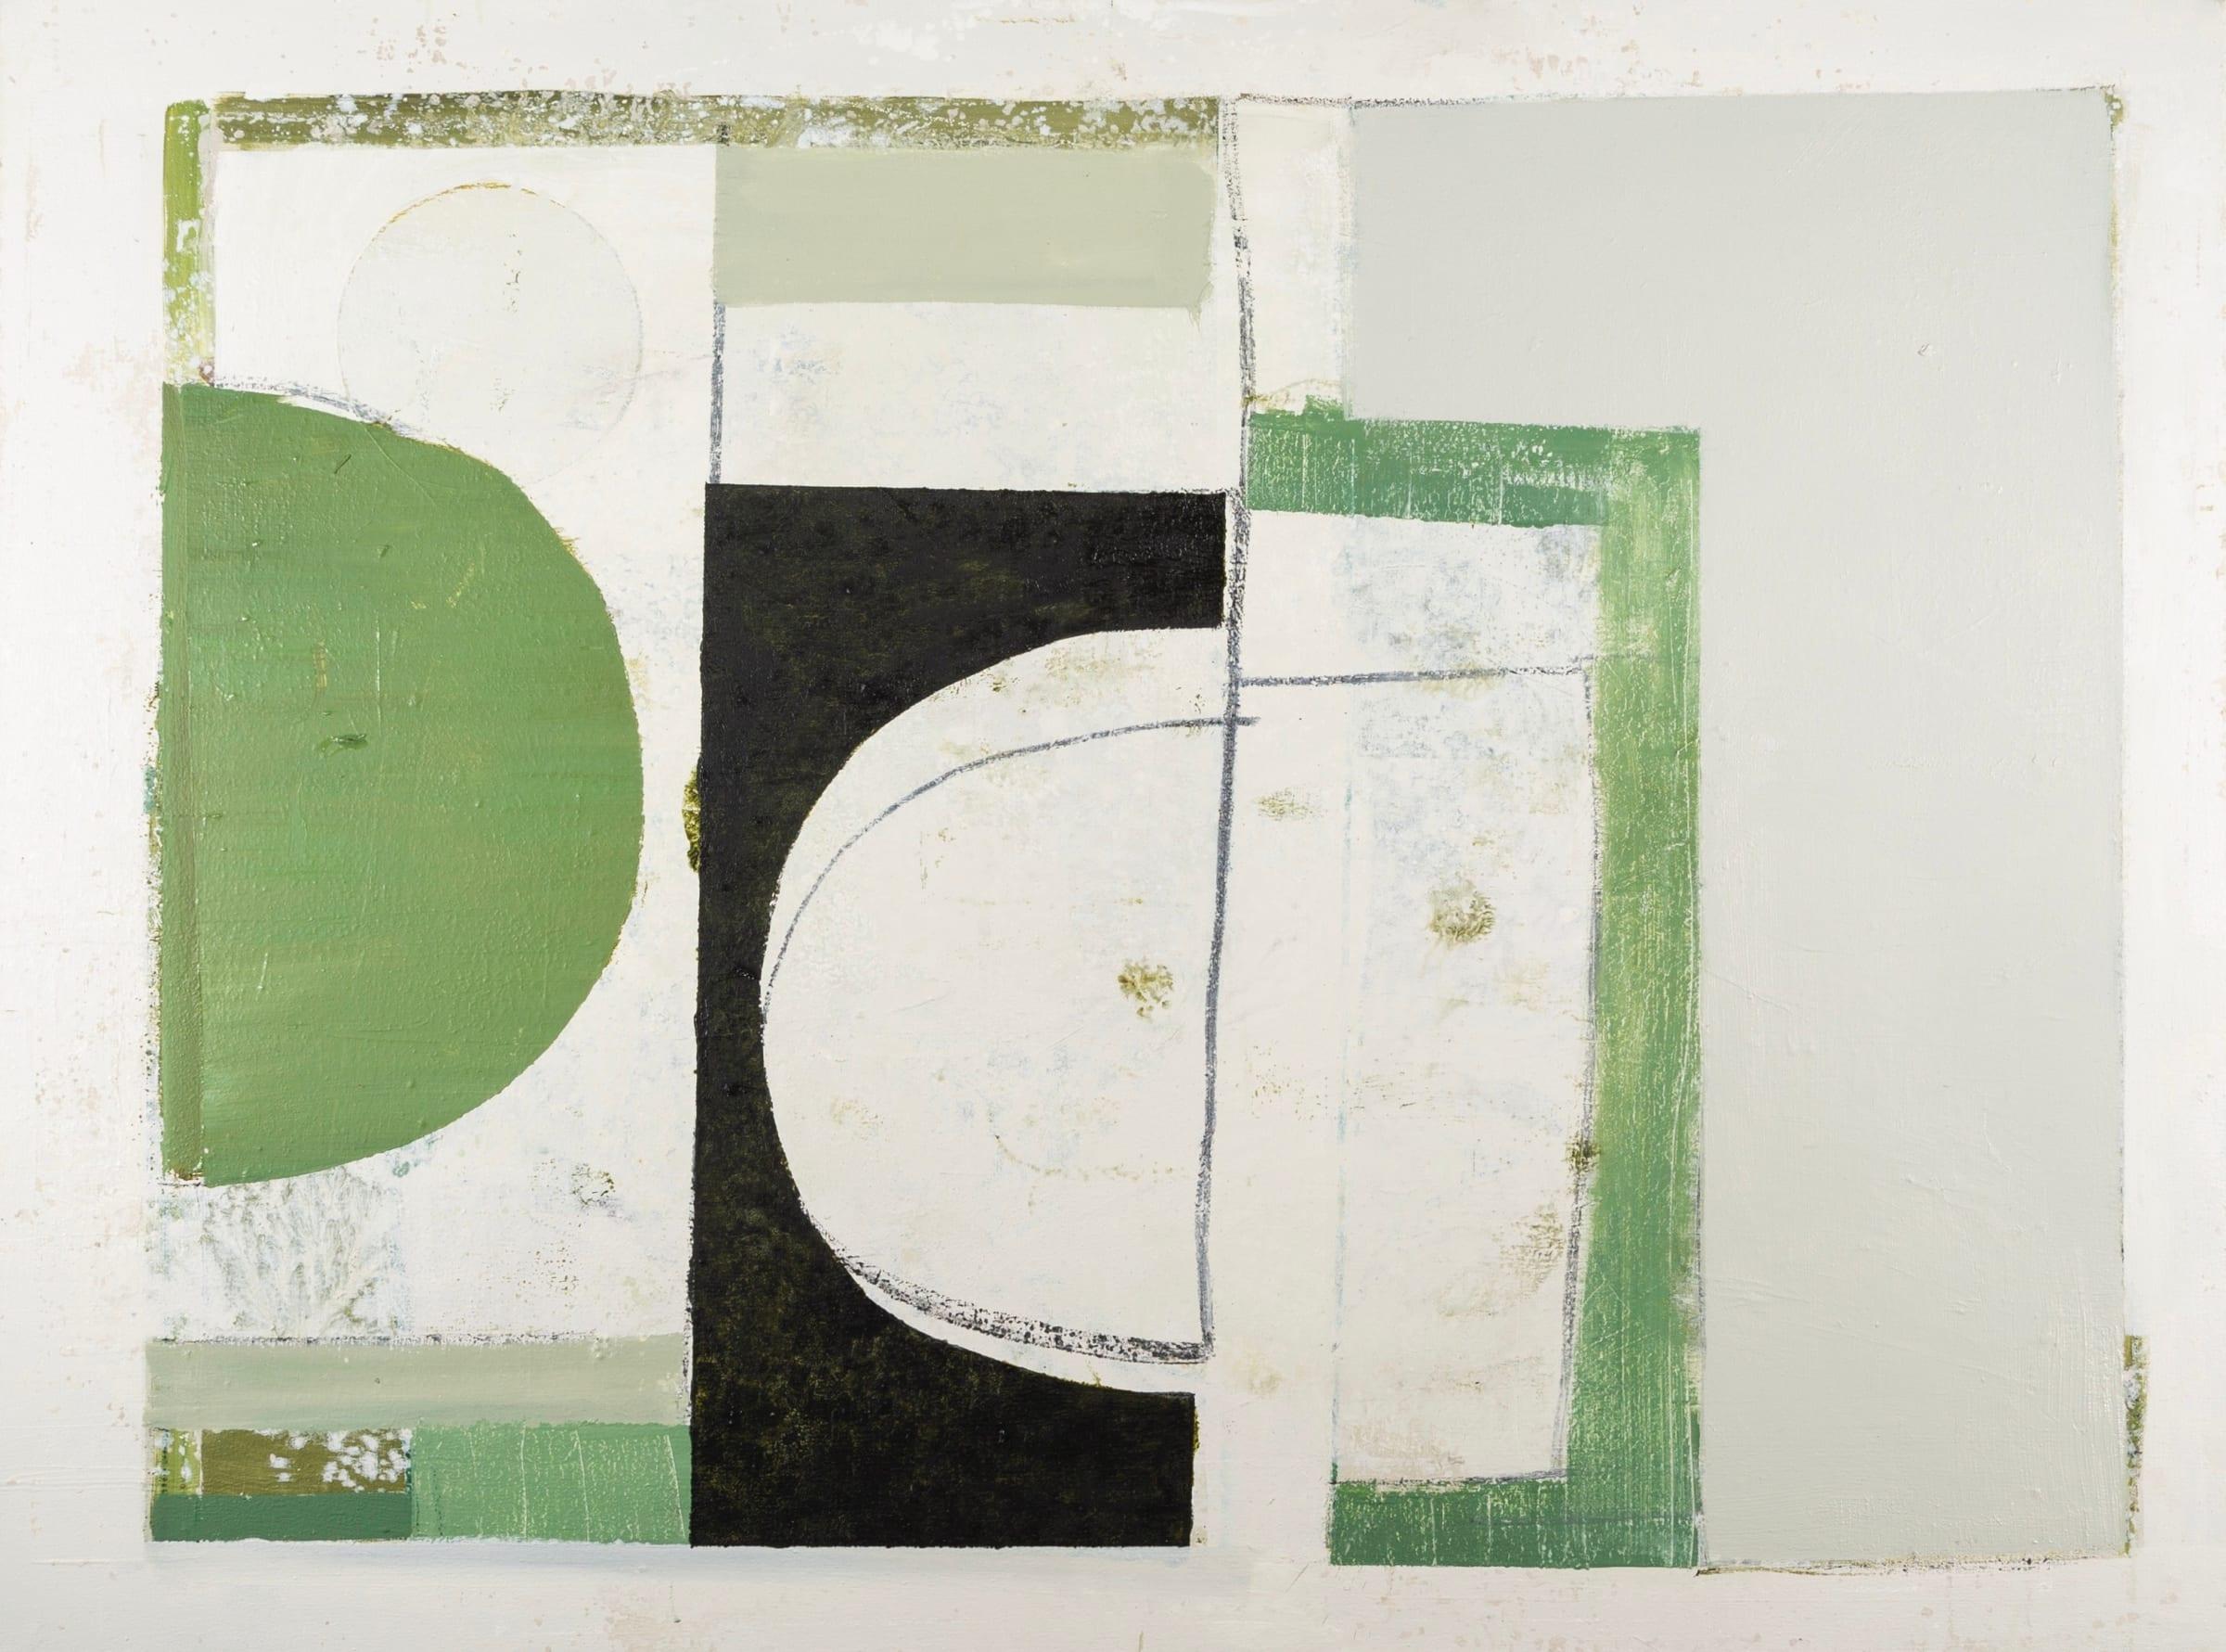 Shape of Space (Green), Oil on Canvas Painting by Daisy Cook B. 1965, 2021

Additional information:
Medium: Oil on canvas
Dimensions: 76 x 101 cm
29 7/8 x 39 3/4 in
Signed and dated

Daisy Cook is a British painter of landscape and still life.

Cook